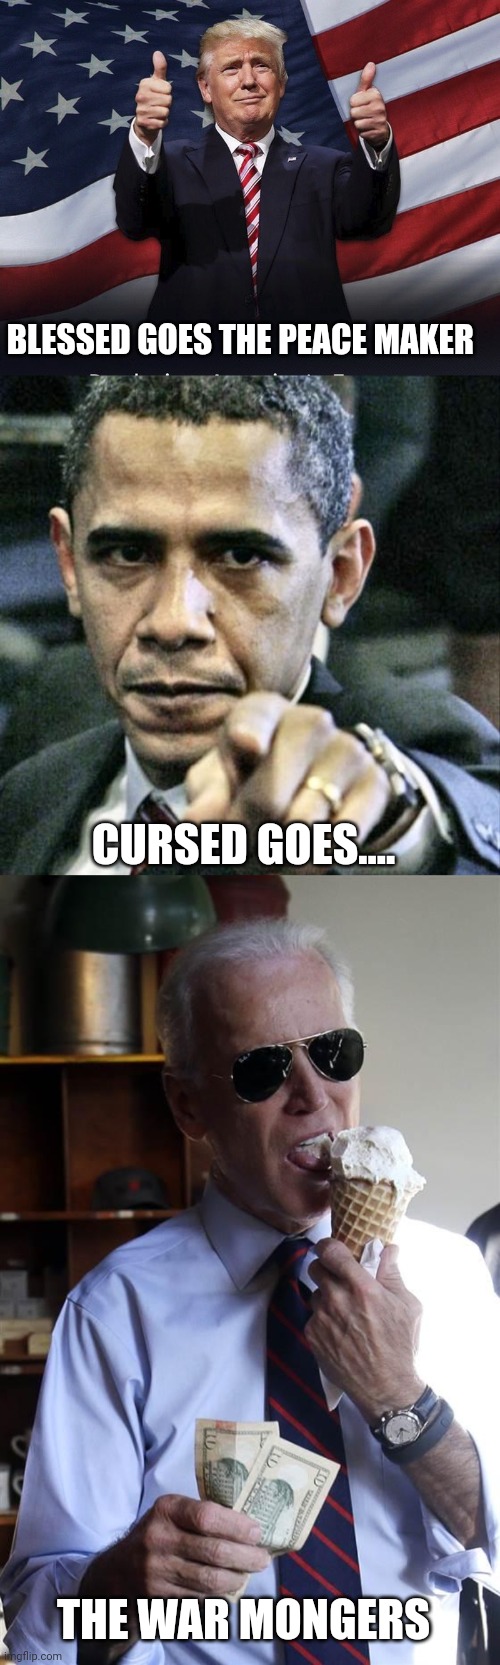 45....to 47 | BLESSED GOES THE PEACE MAKER; CURSED GOES.... THE WAR MONGERS | image tagged in donald trump thumbs up,memes,pissed off obama,joe biden ice cream and cash | made w/ Imgflip meme maker